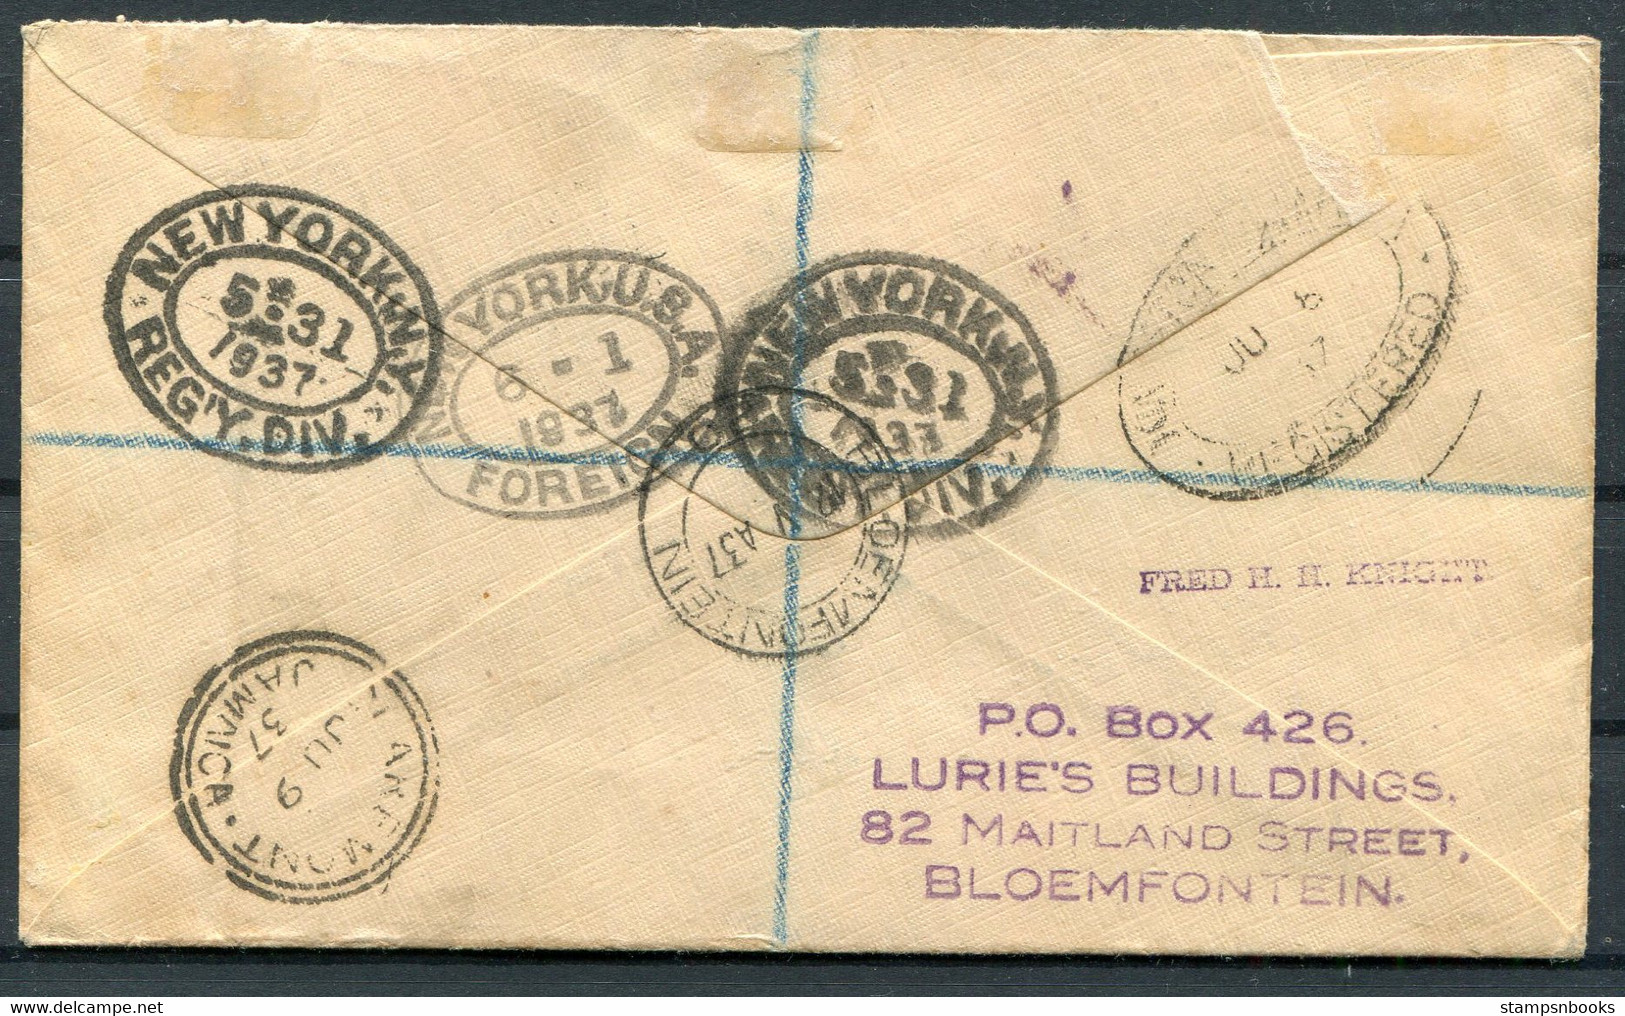 1937 South Africa Coronation First Day Cover, Registered Airmail Bloemfontein - Claremont Jamaica - Airmail